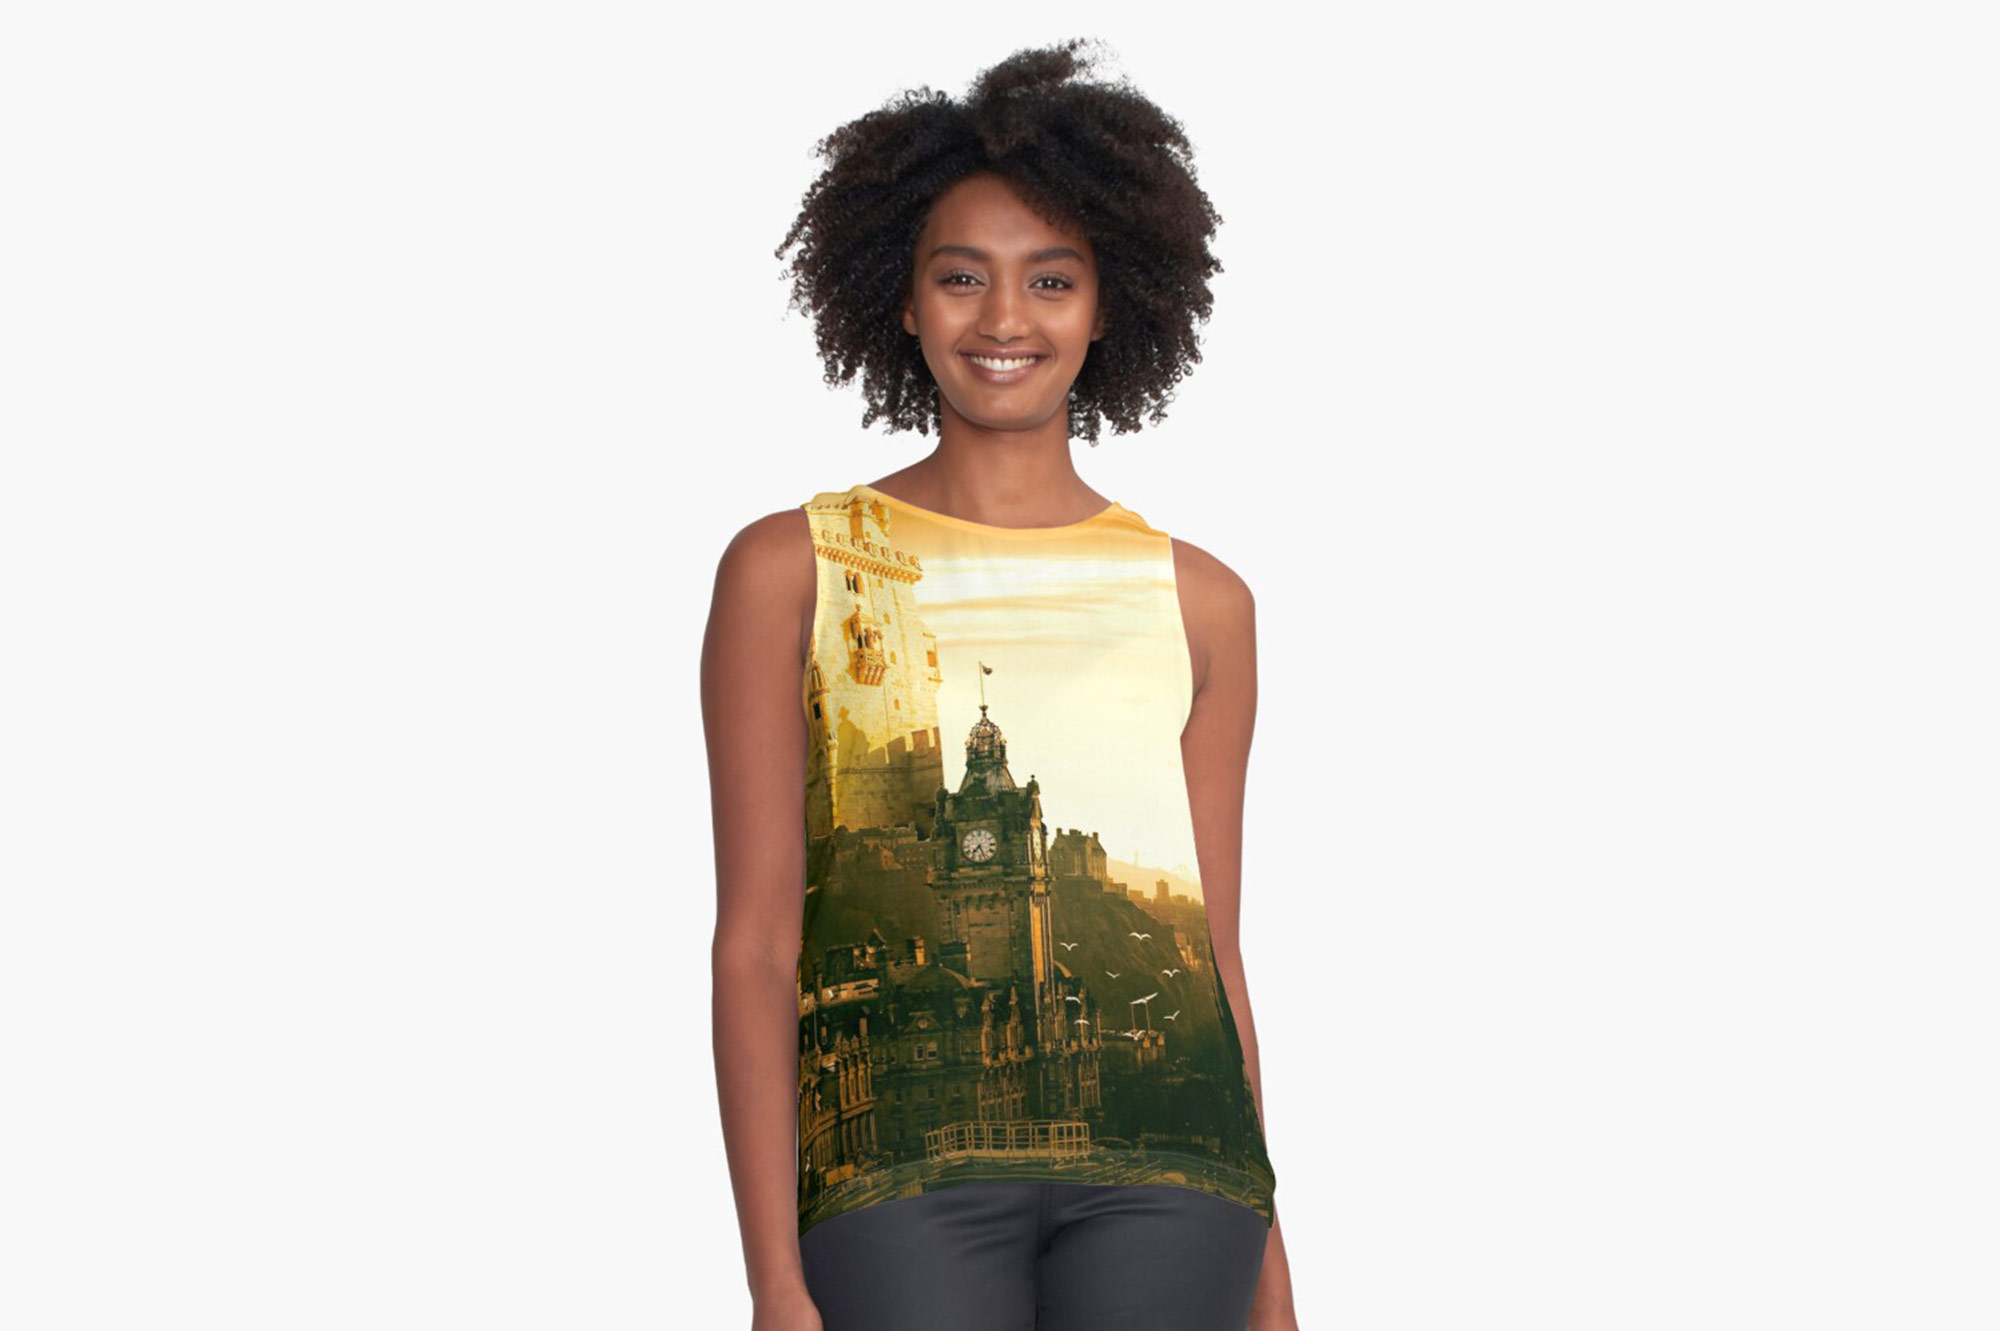 Strong Tower Sleeveless Top by Godserv Designs